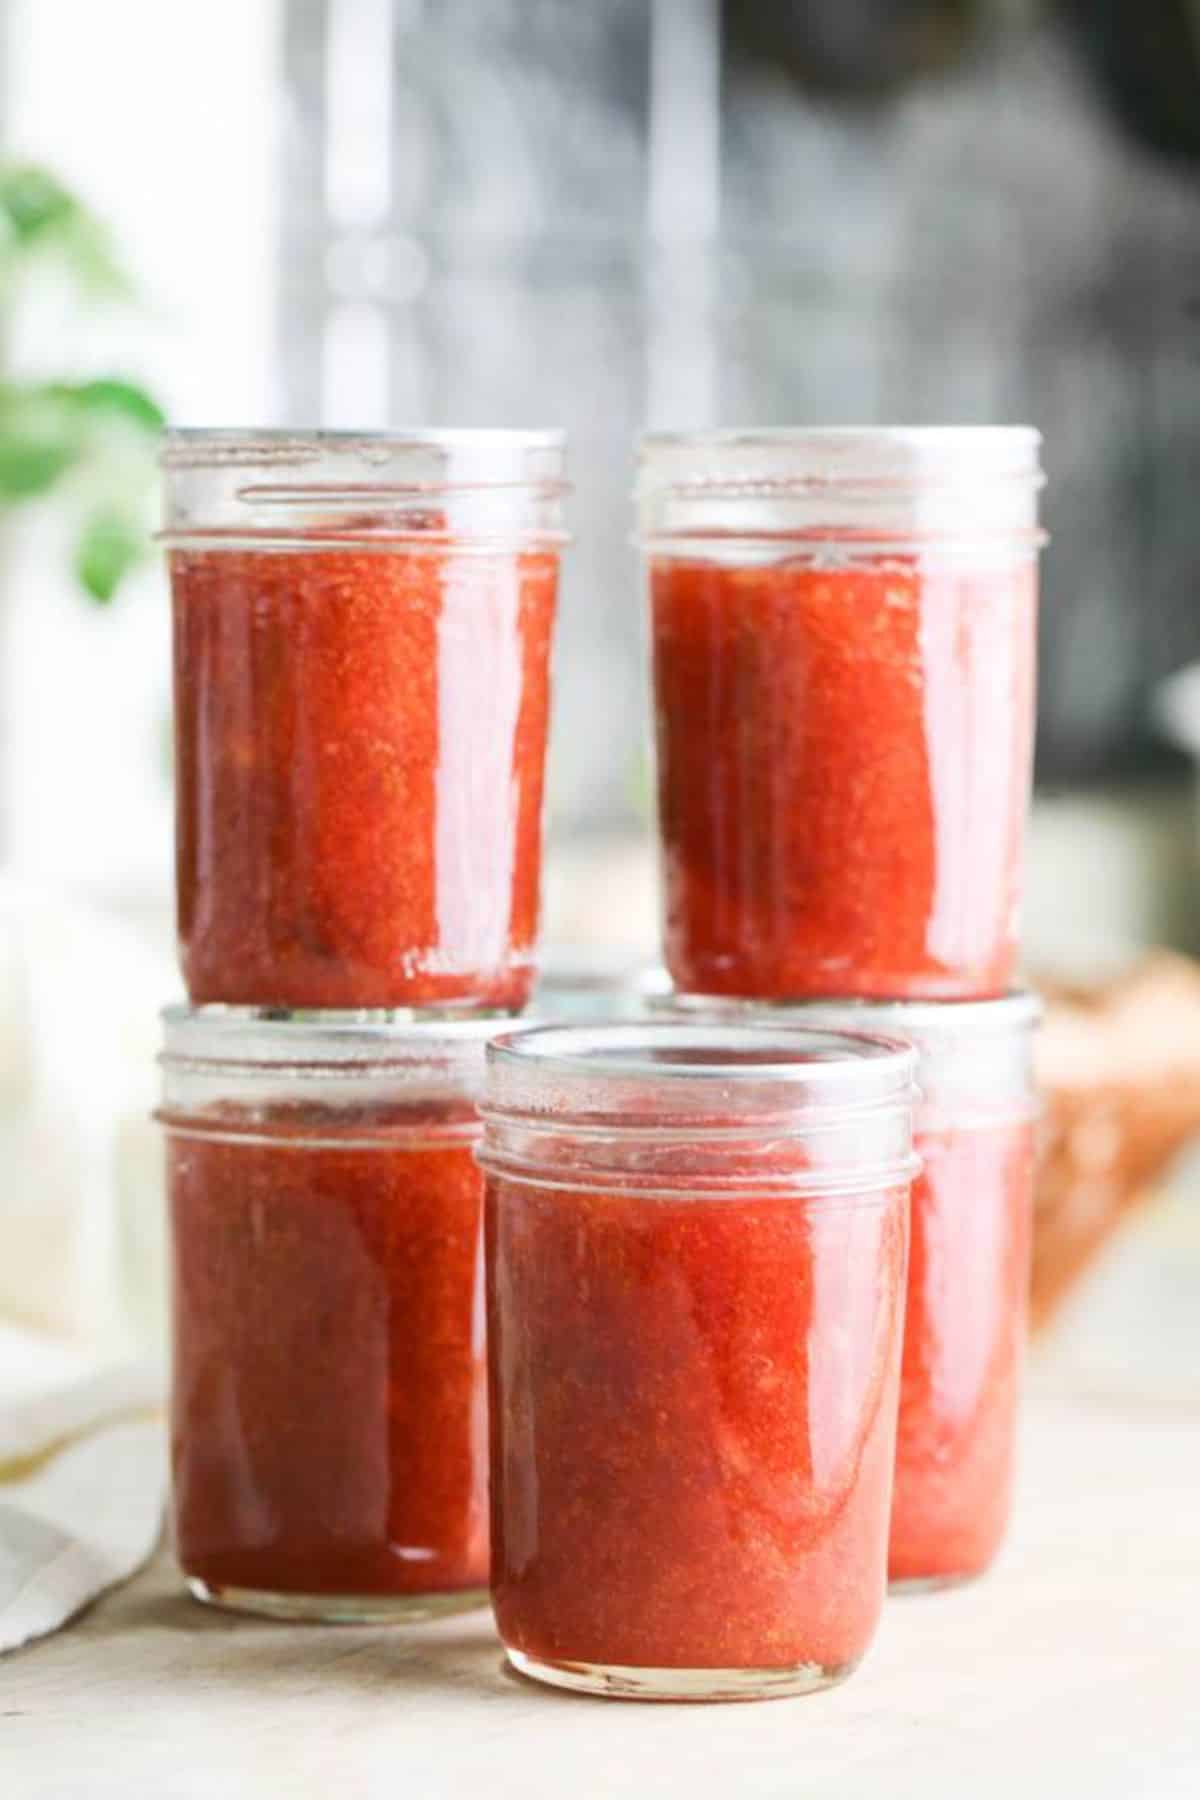 Delicious plum and apple jam in glass jars.